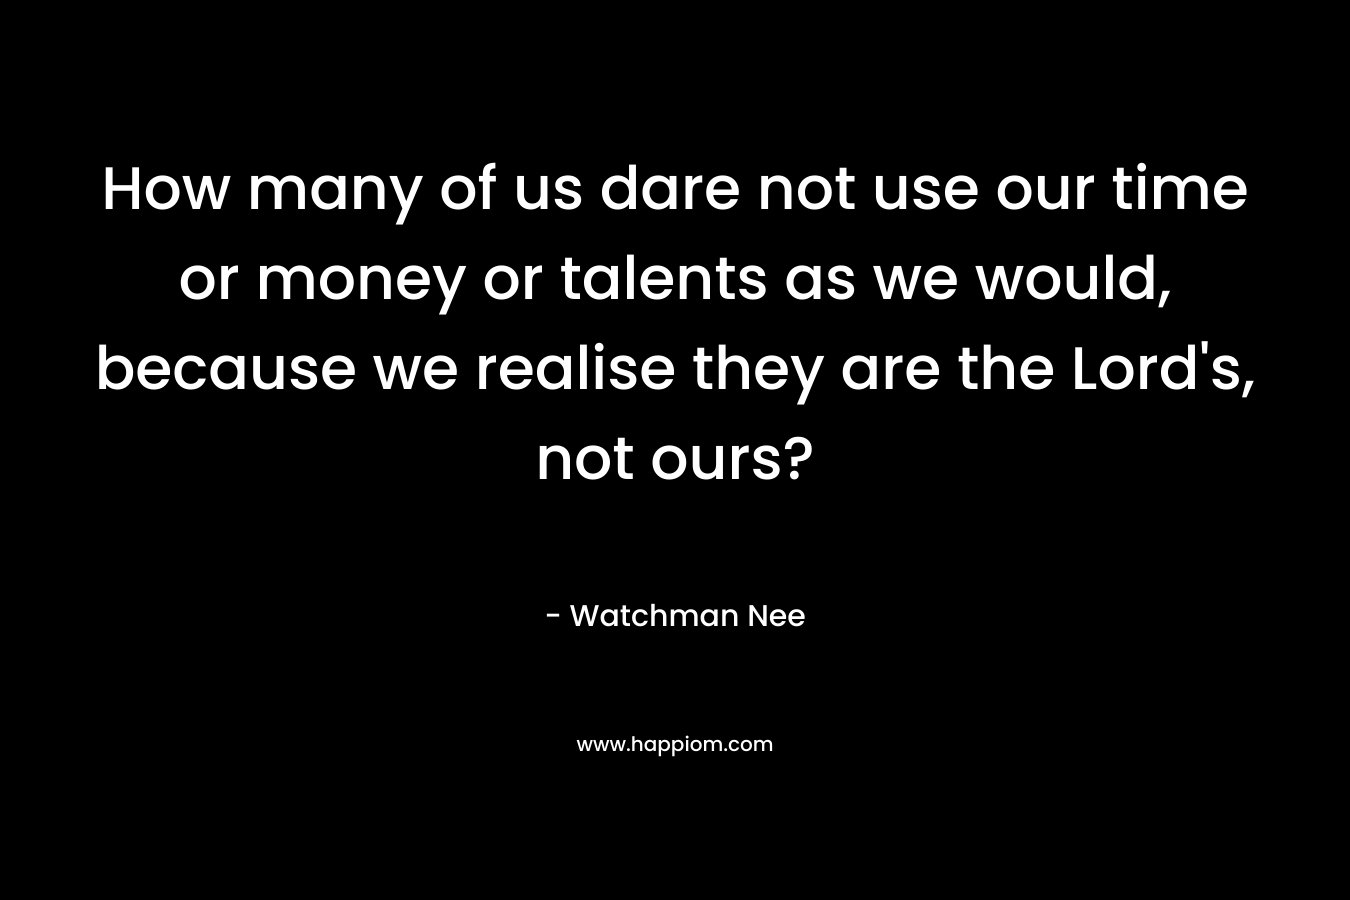 How many of us dare not use our time or money or talents as we would, because we realise they are the Lord’s, not ours? – Watchman Nee